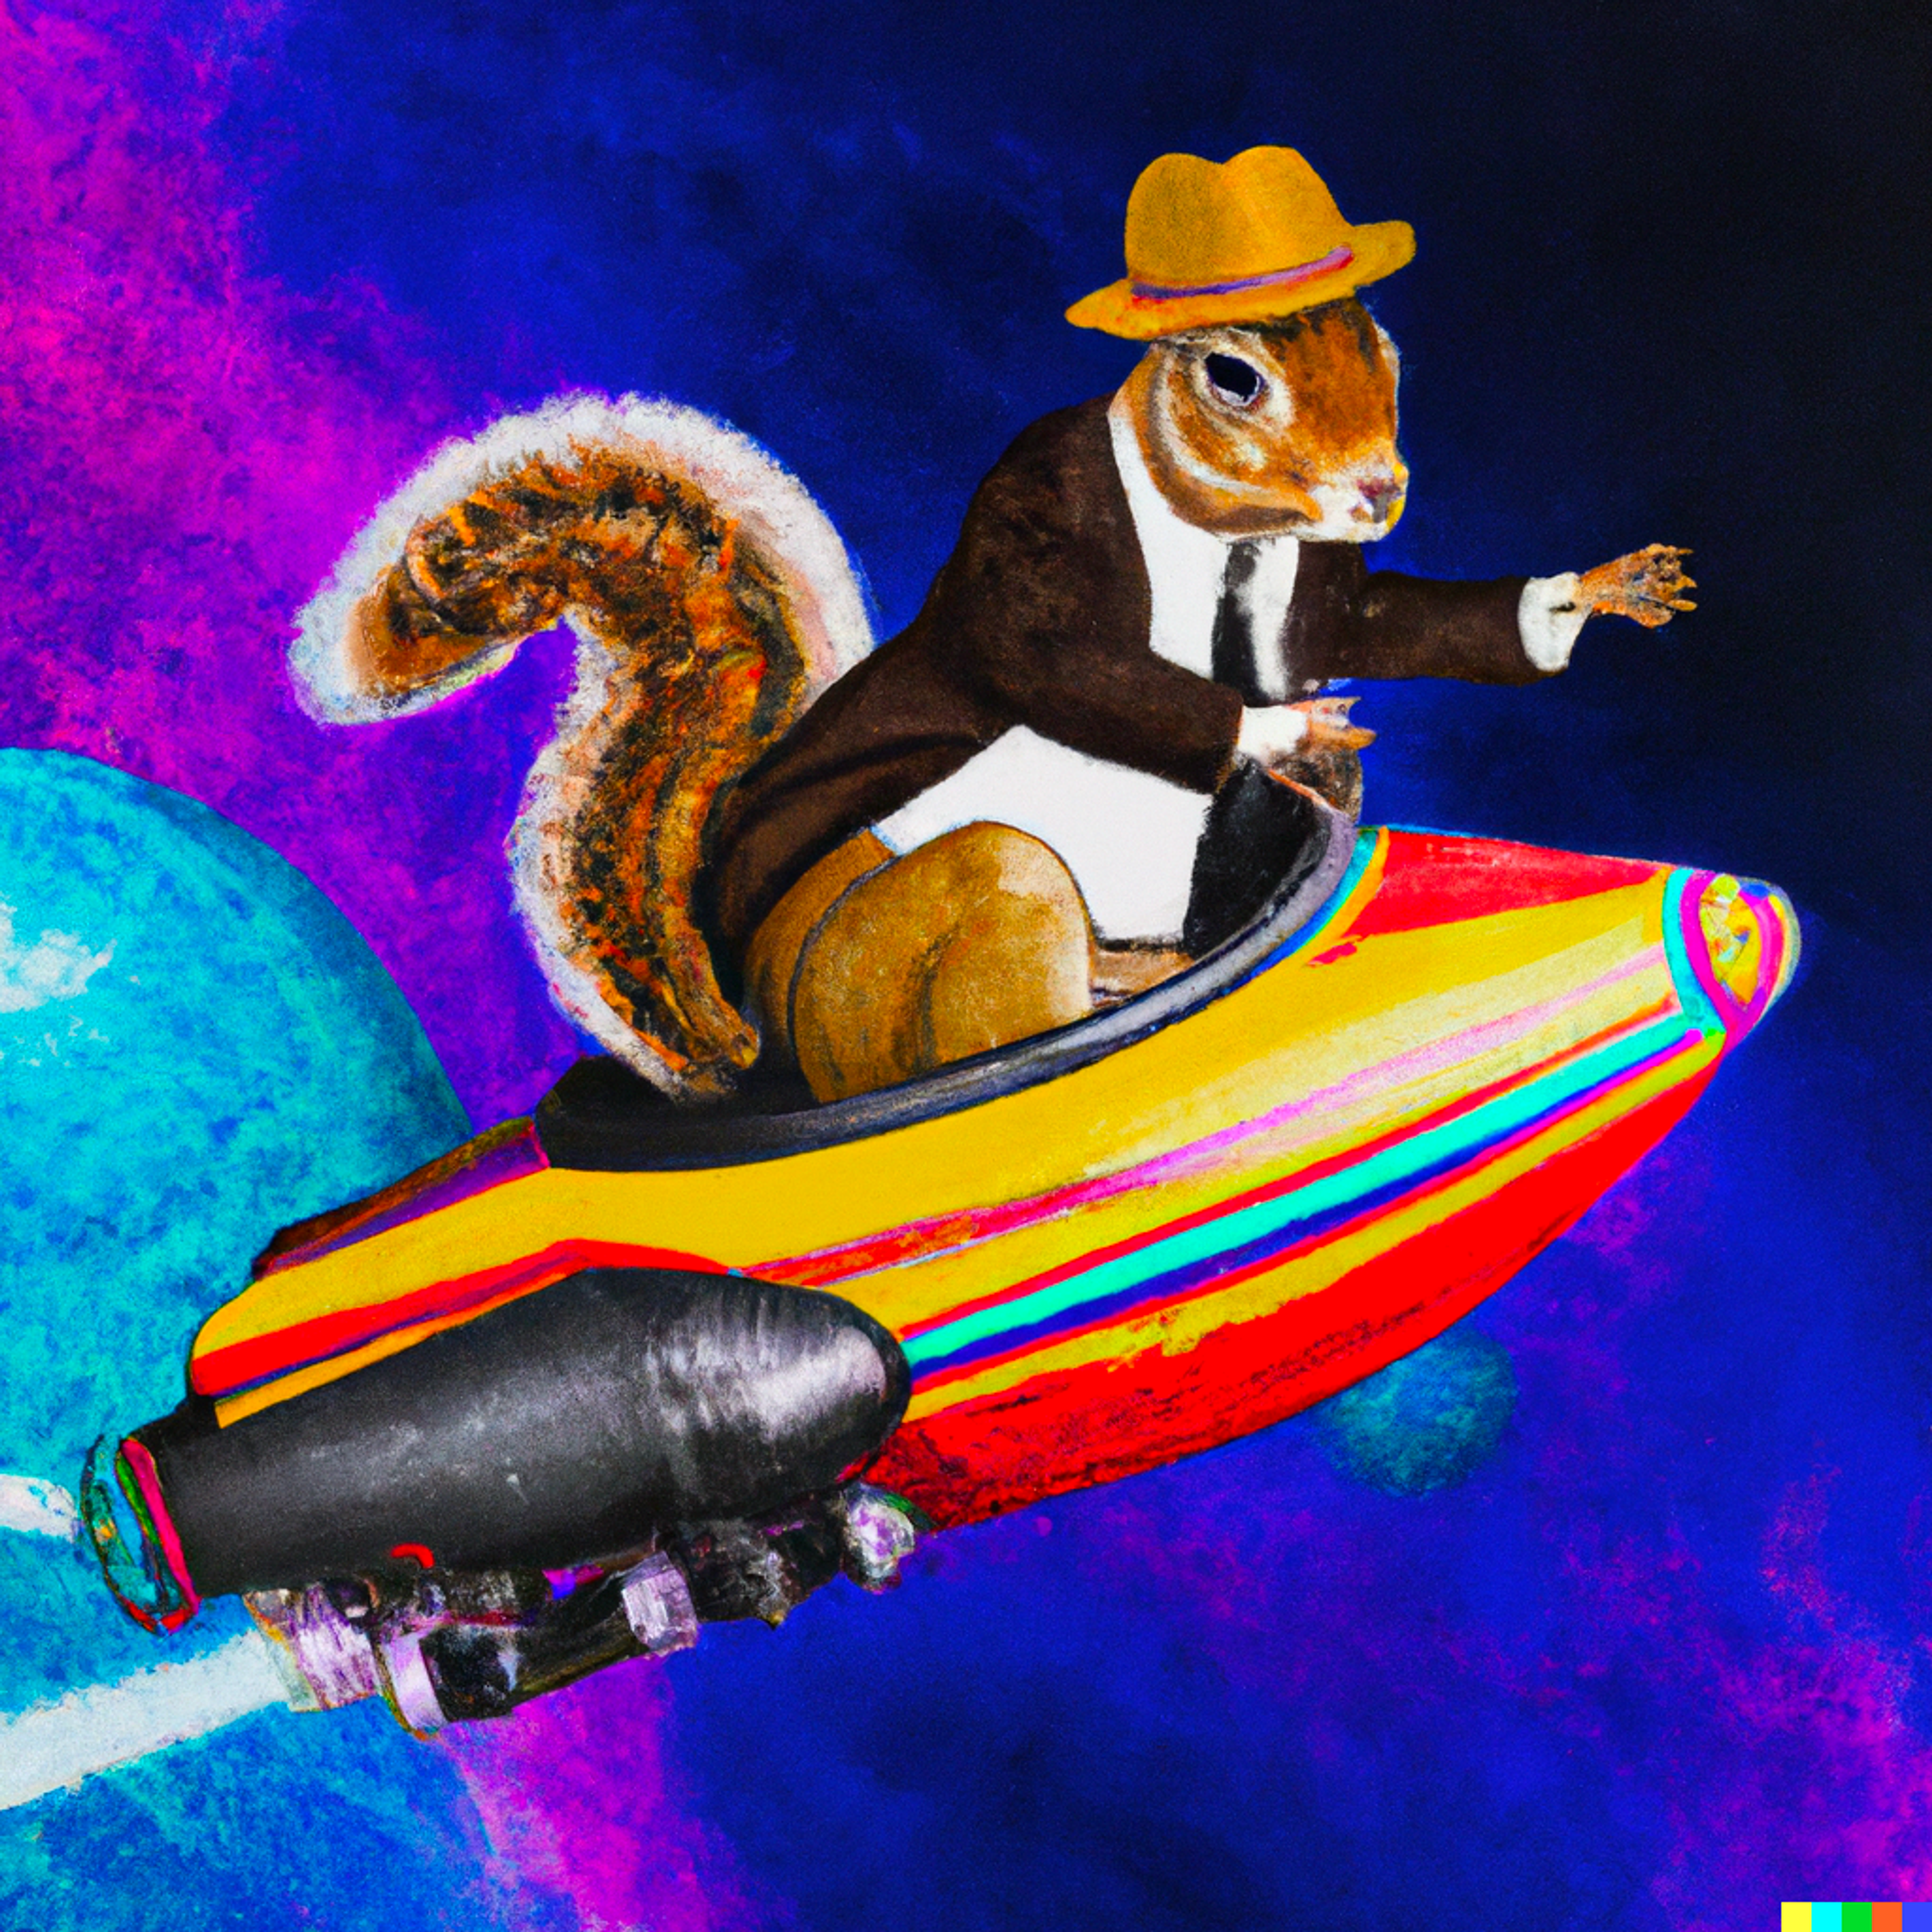 Digital art of a squirrel wearing a hat riding a tiny rocketship into space.